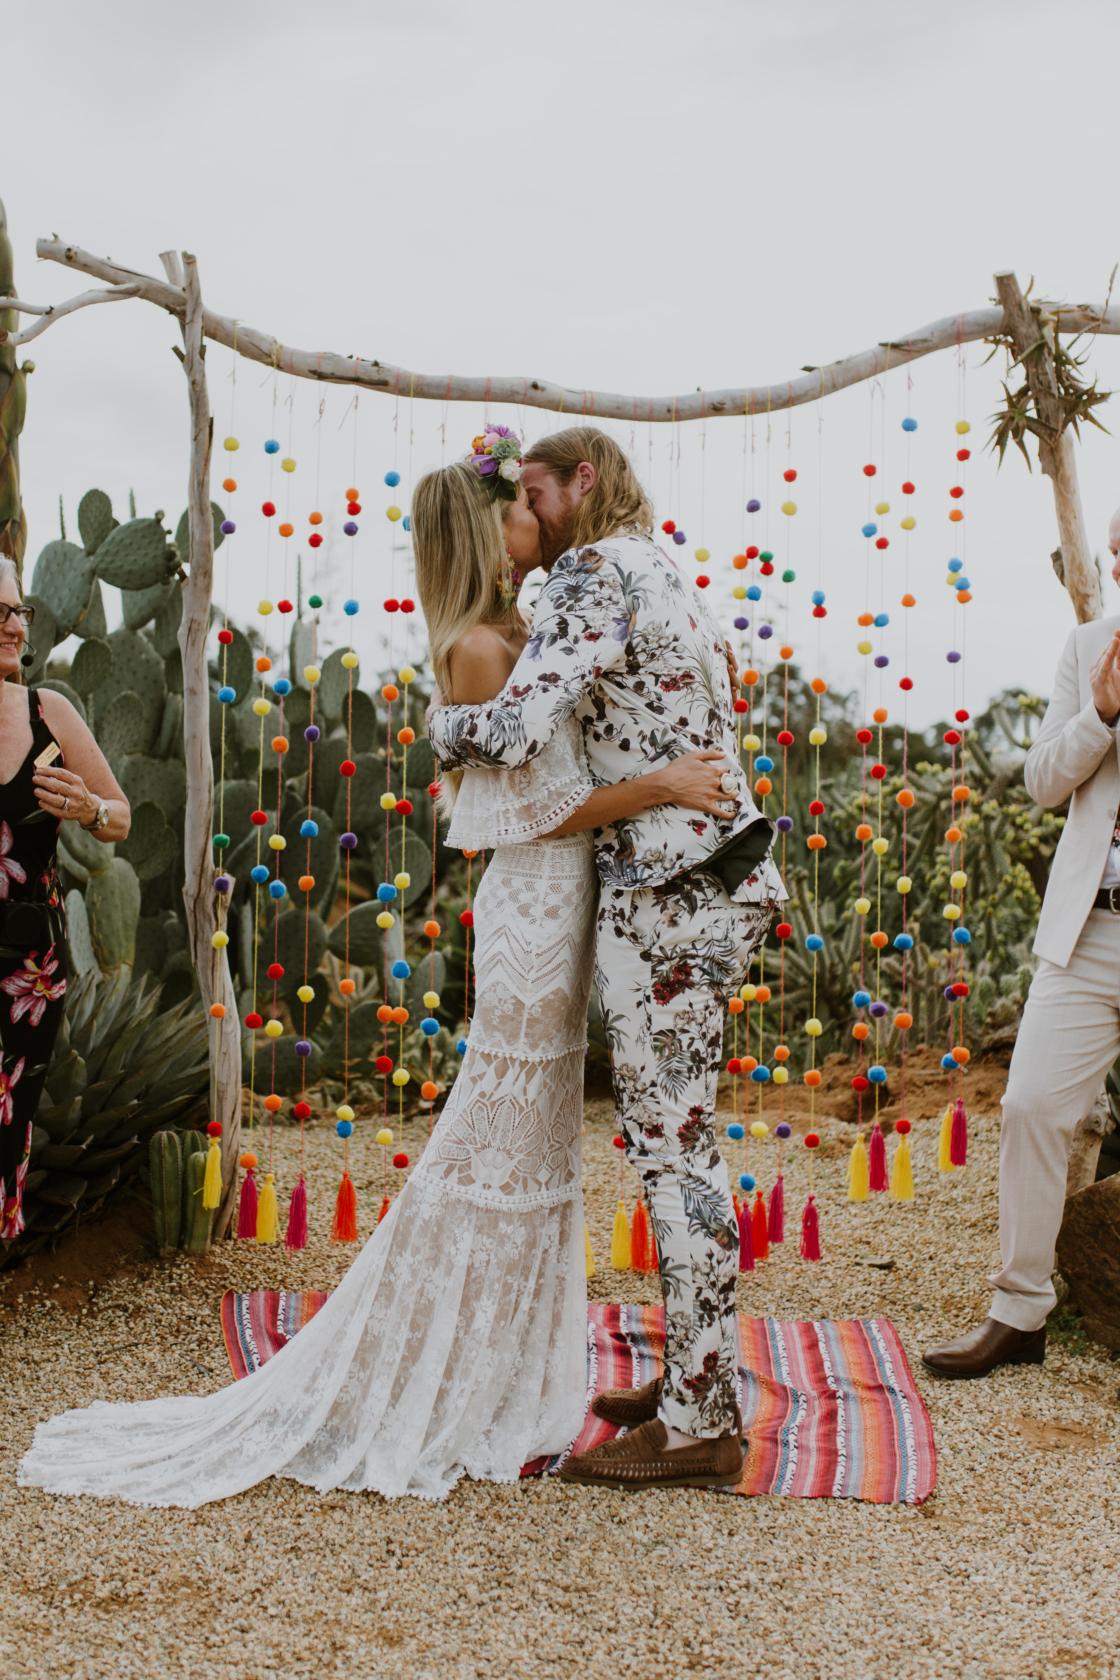 Colorful wedding ceremony | Elsa Campbell